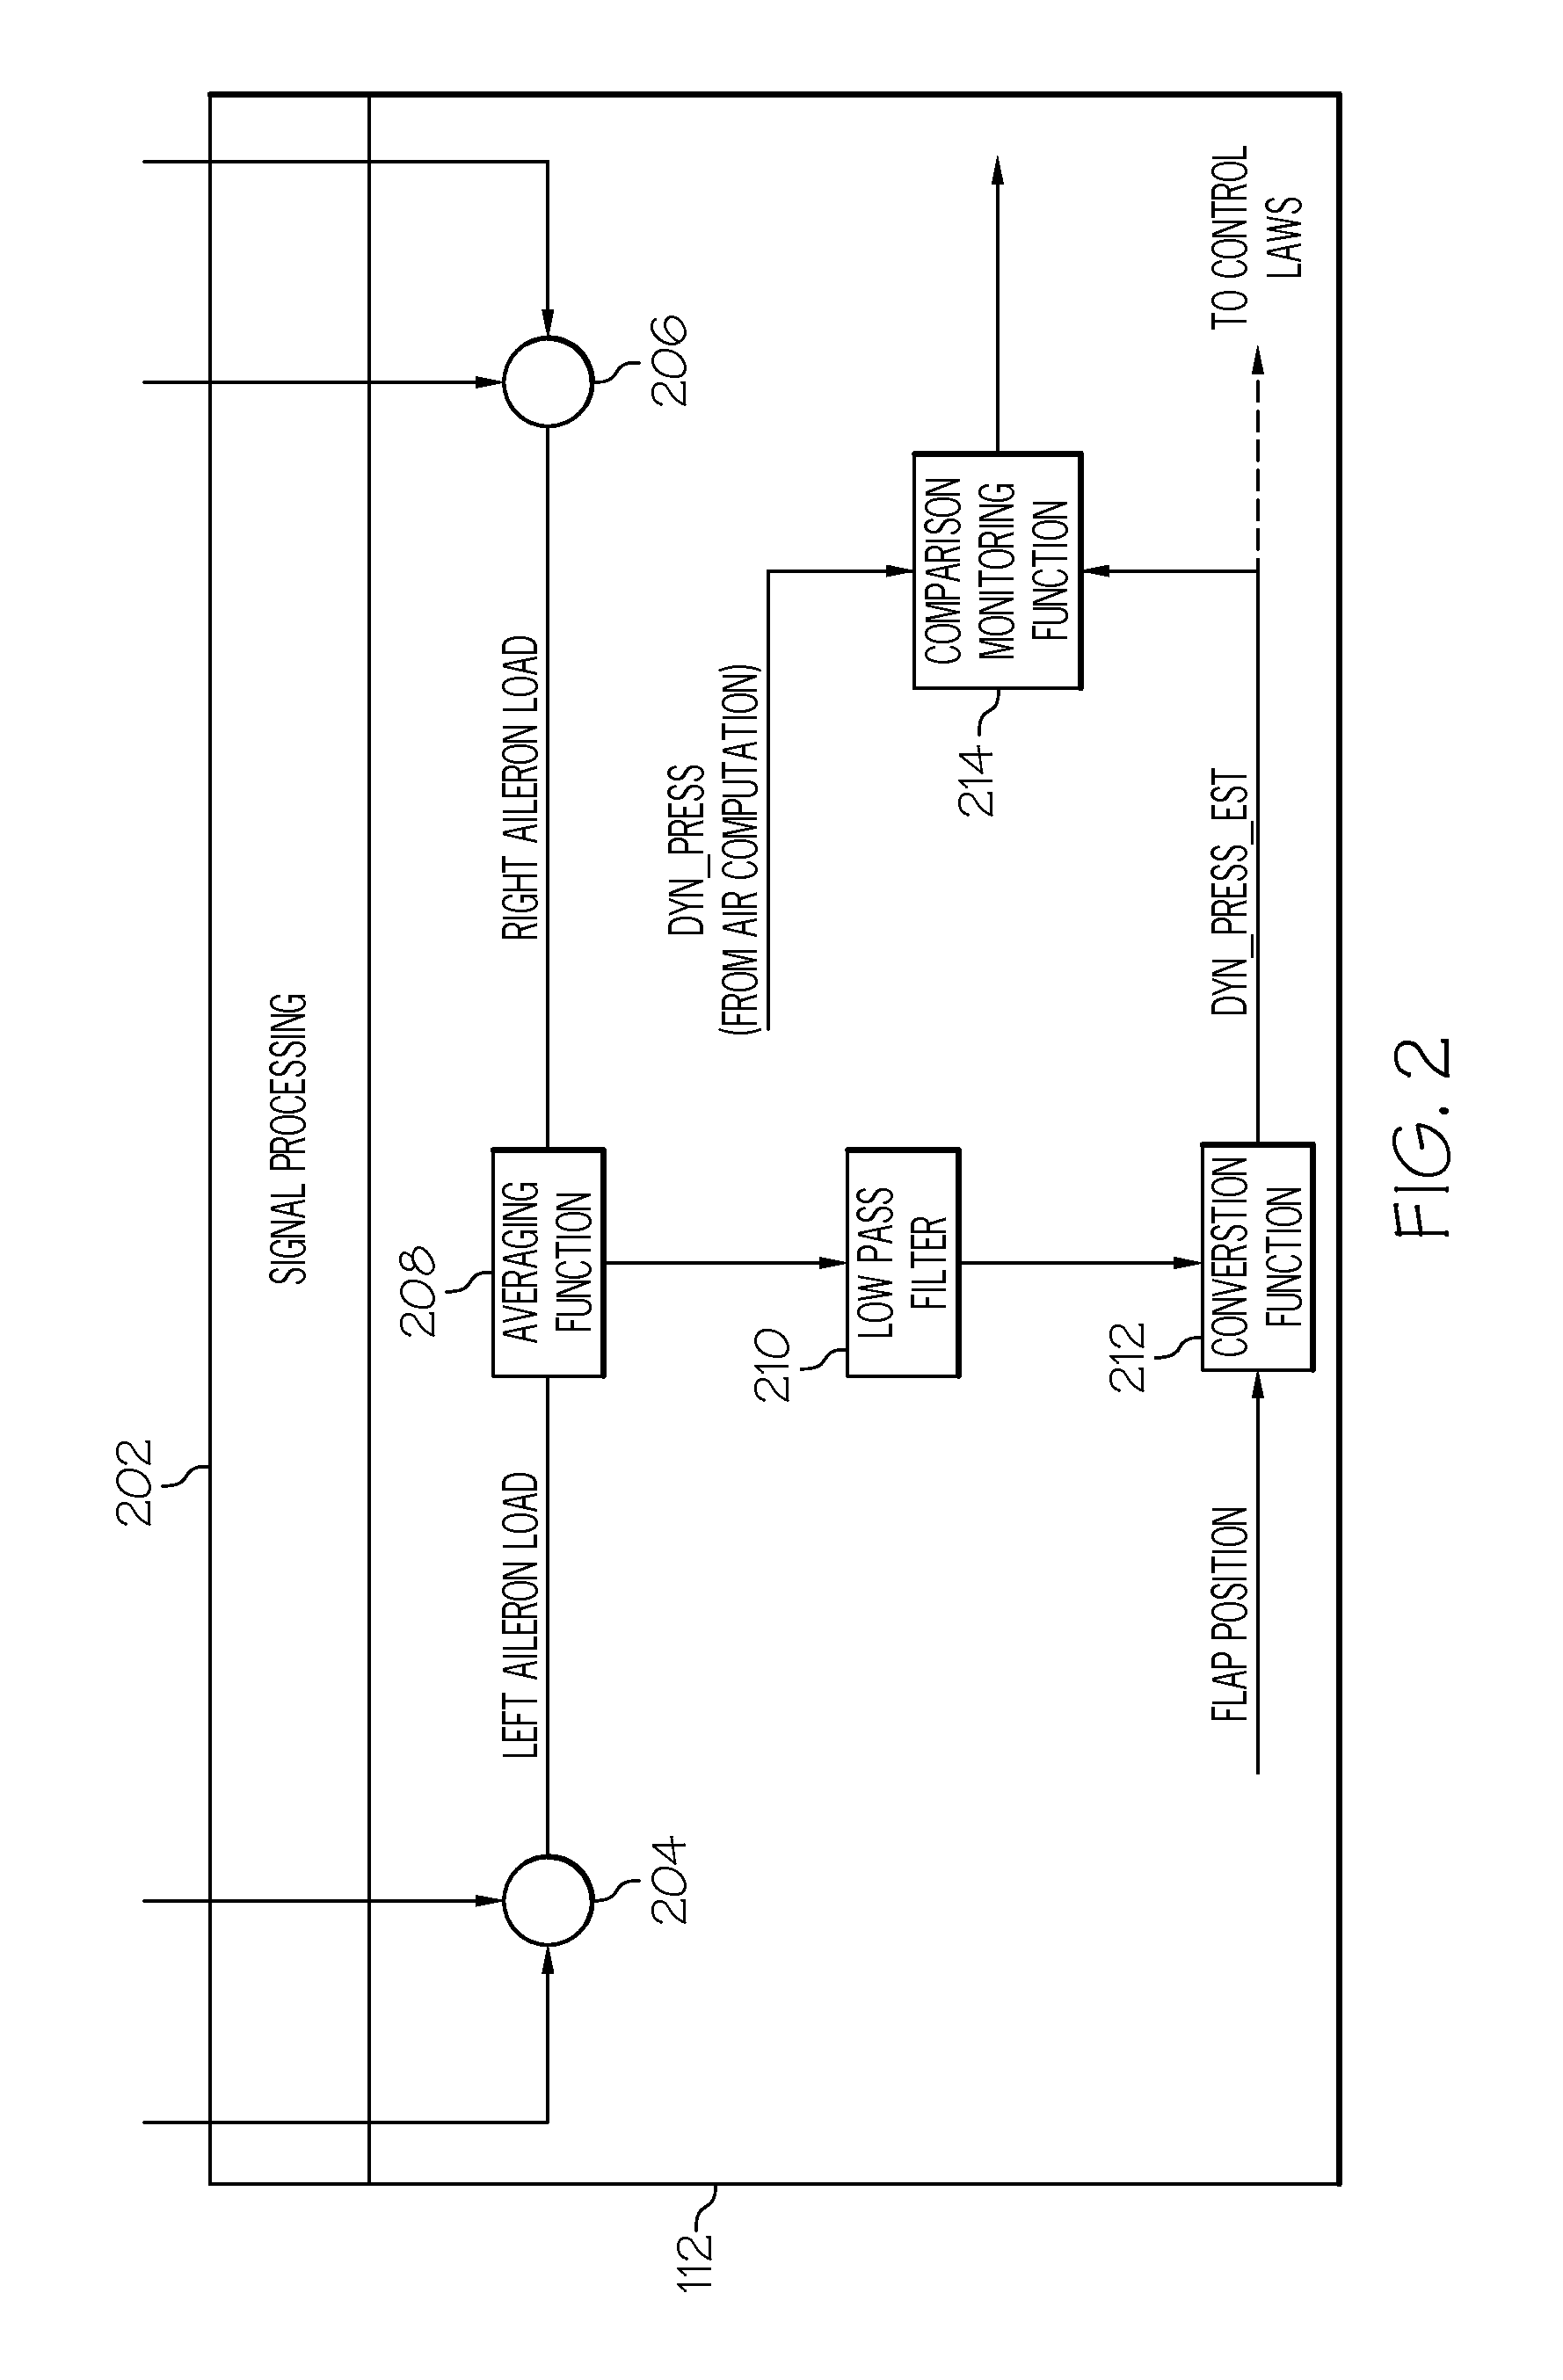 Aircraft dynamic pressure estimation system and method